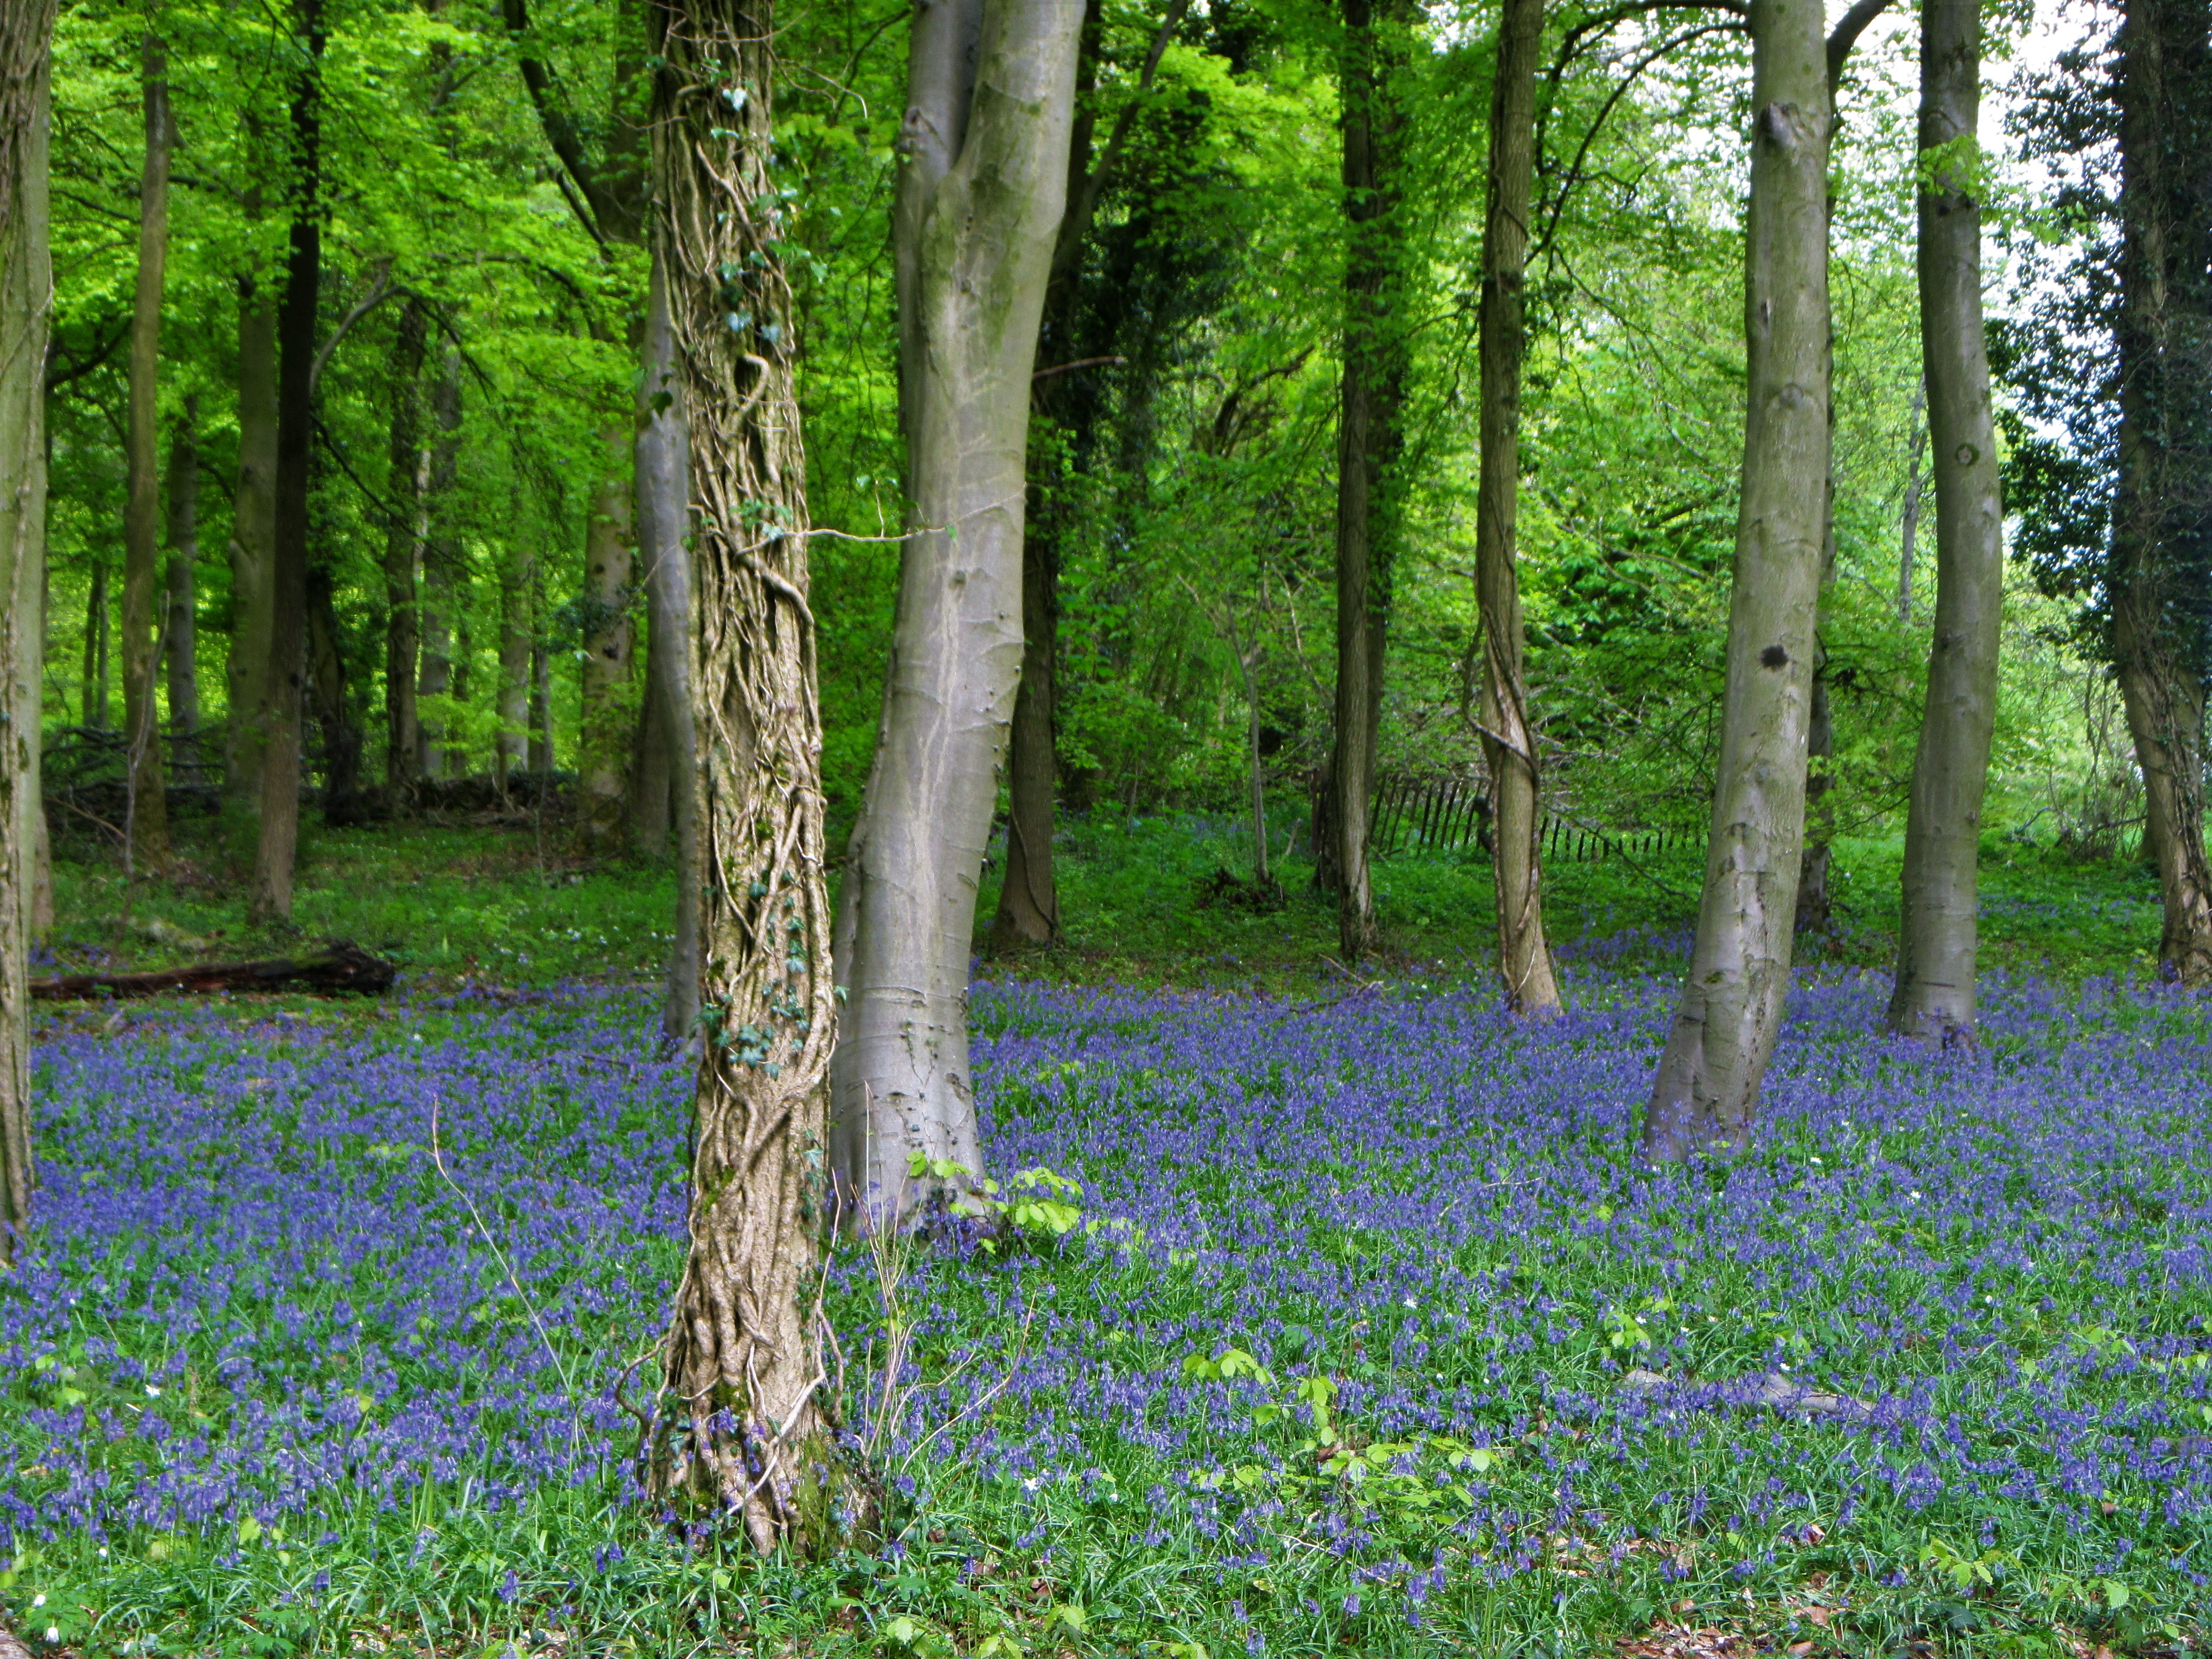 Standish wood - bluebells and lots of trees May 2018 C Aistrop